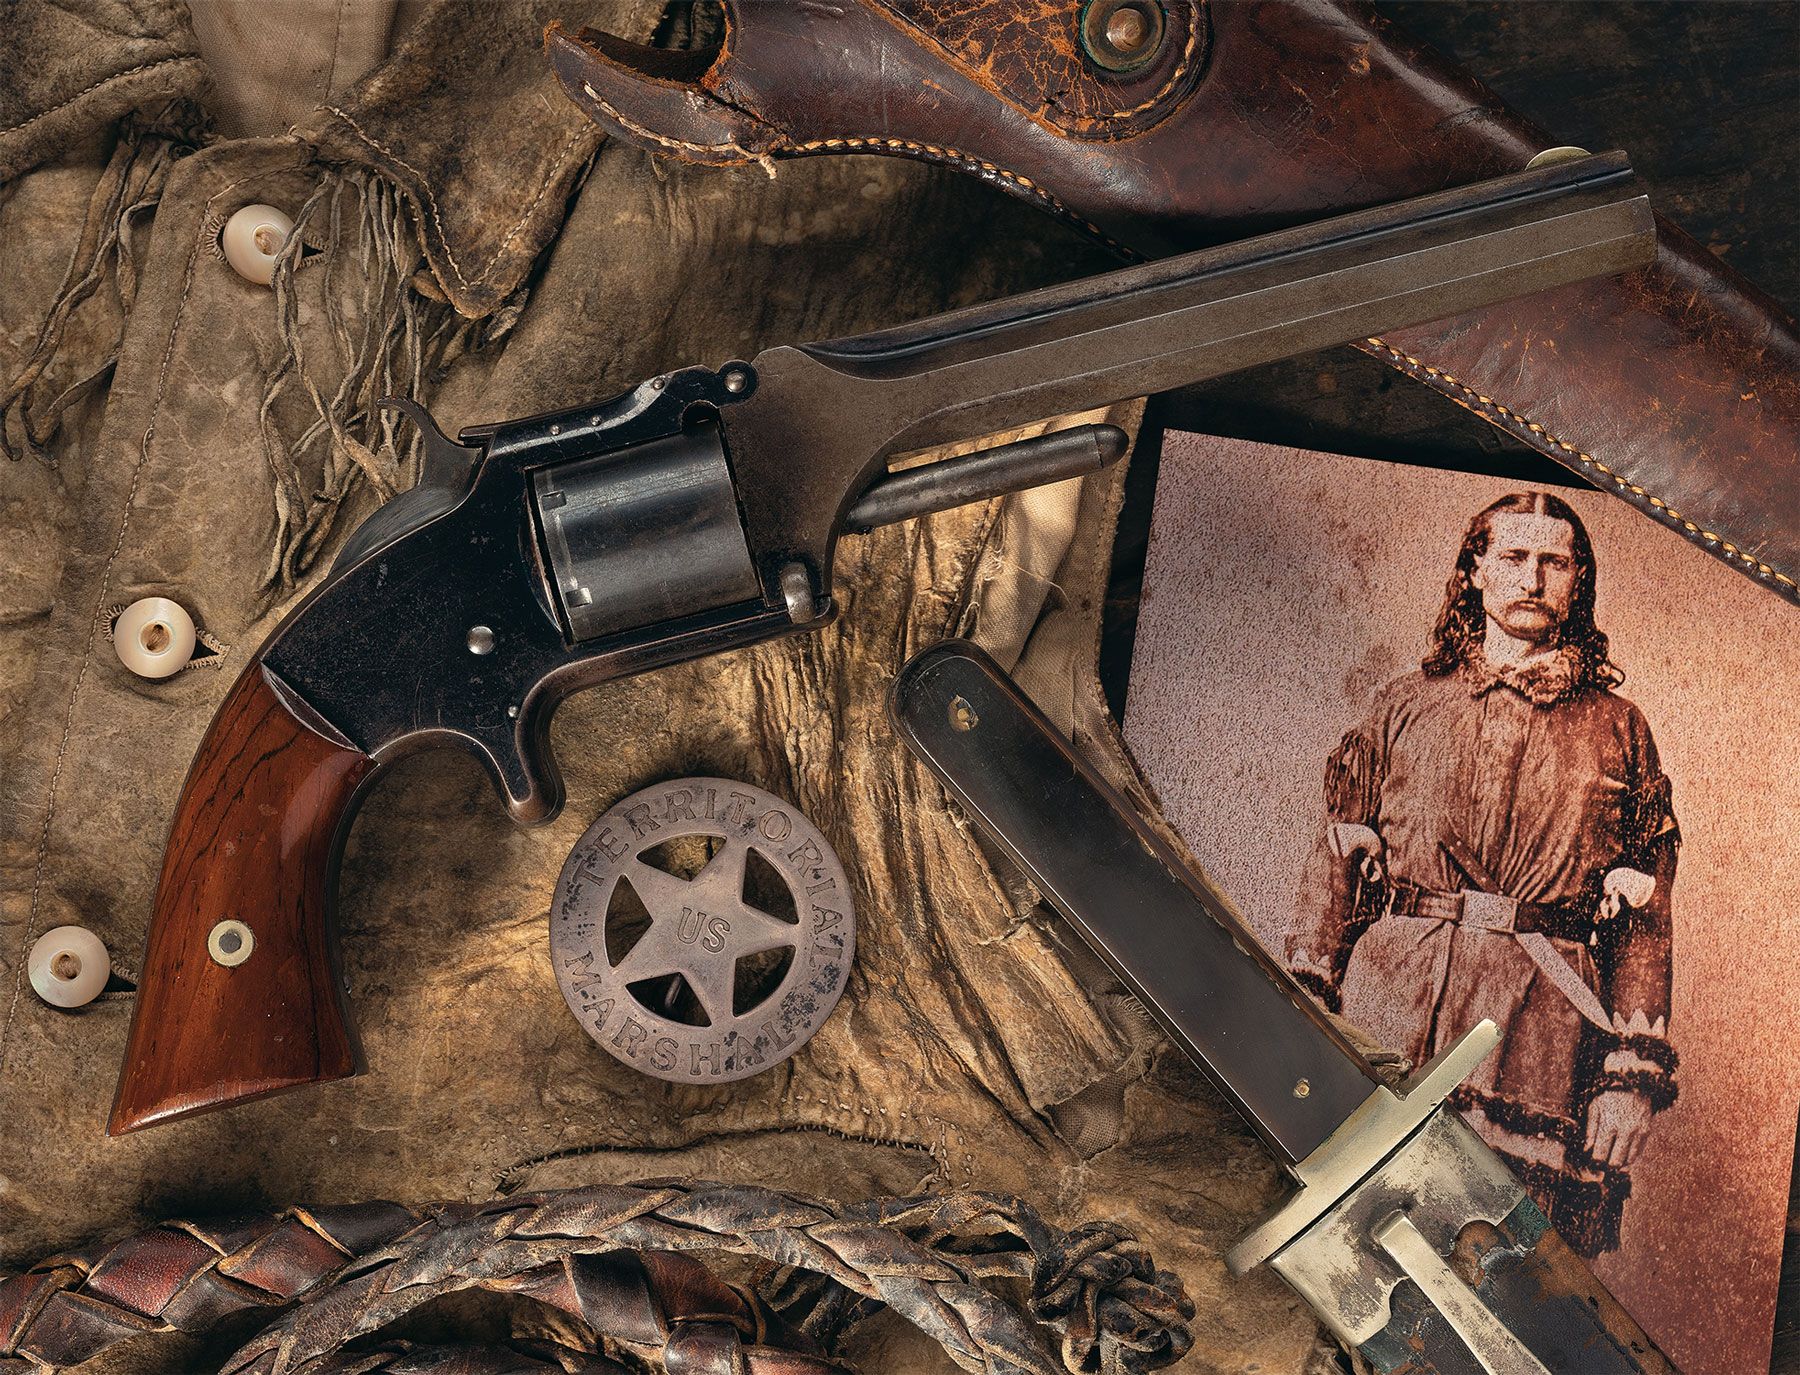 Wild Bill Hickok's Historic Smith & Wesson Model No. 2 Old Army Revolver to Auction this August